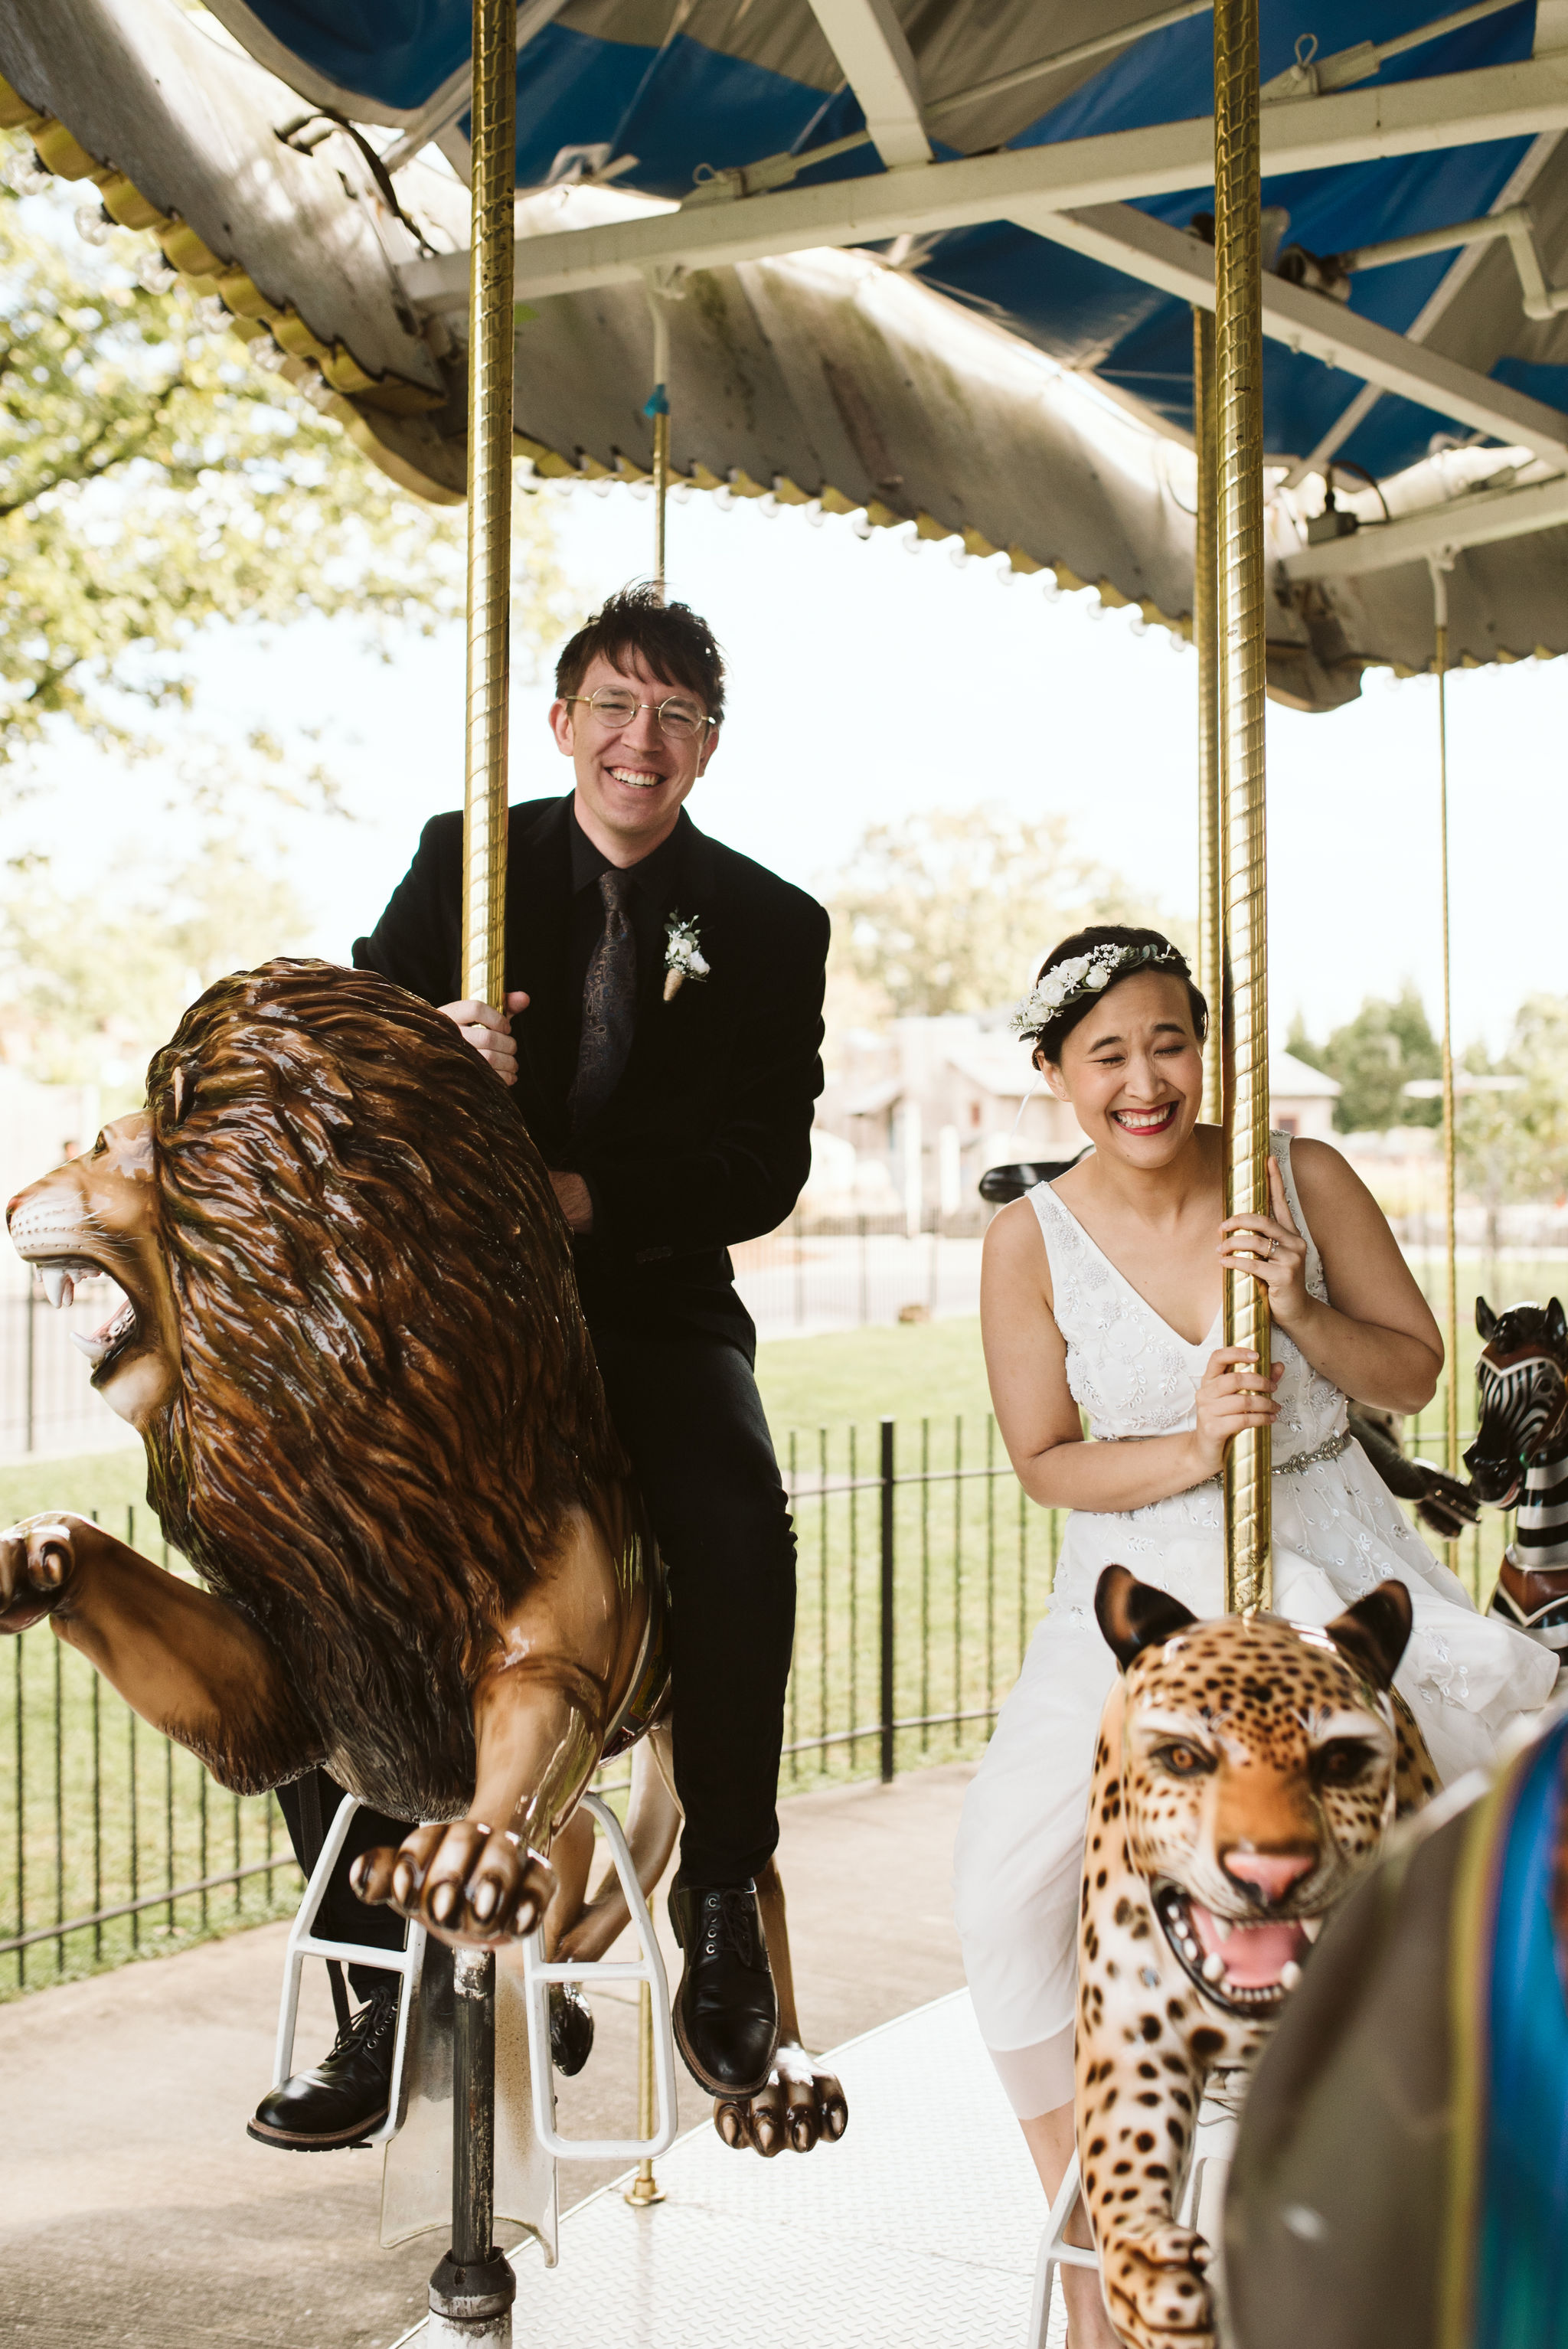  Baltimore, Maryland Wedding Photographer, The Mansion House at the Maryland Zoo, Relaxed, Romantic, Laid Back, Fun Photo of Bride and Groom on Carousel, Couple Laughing Together 